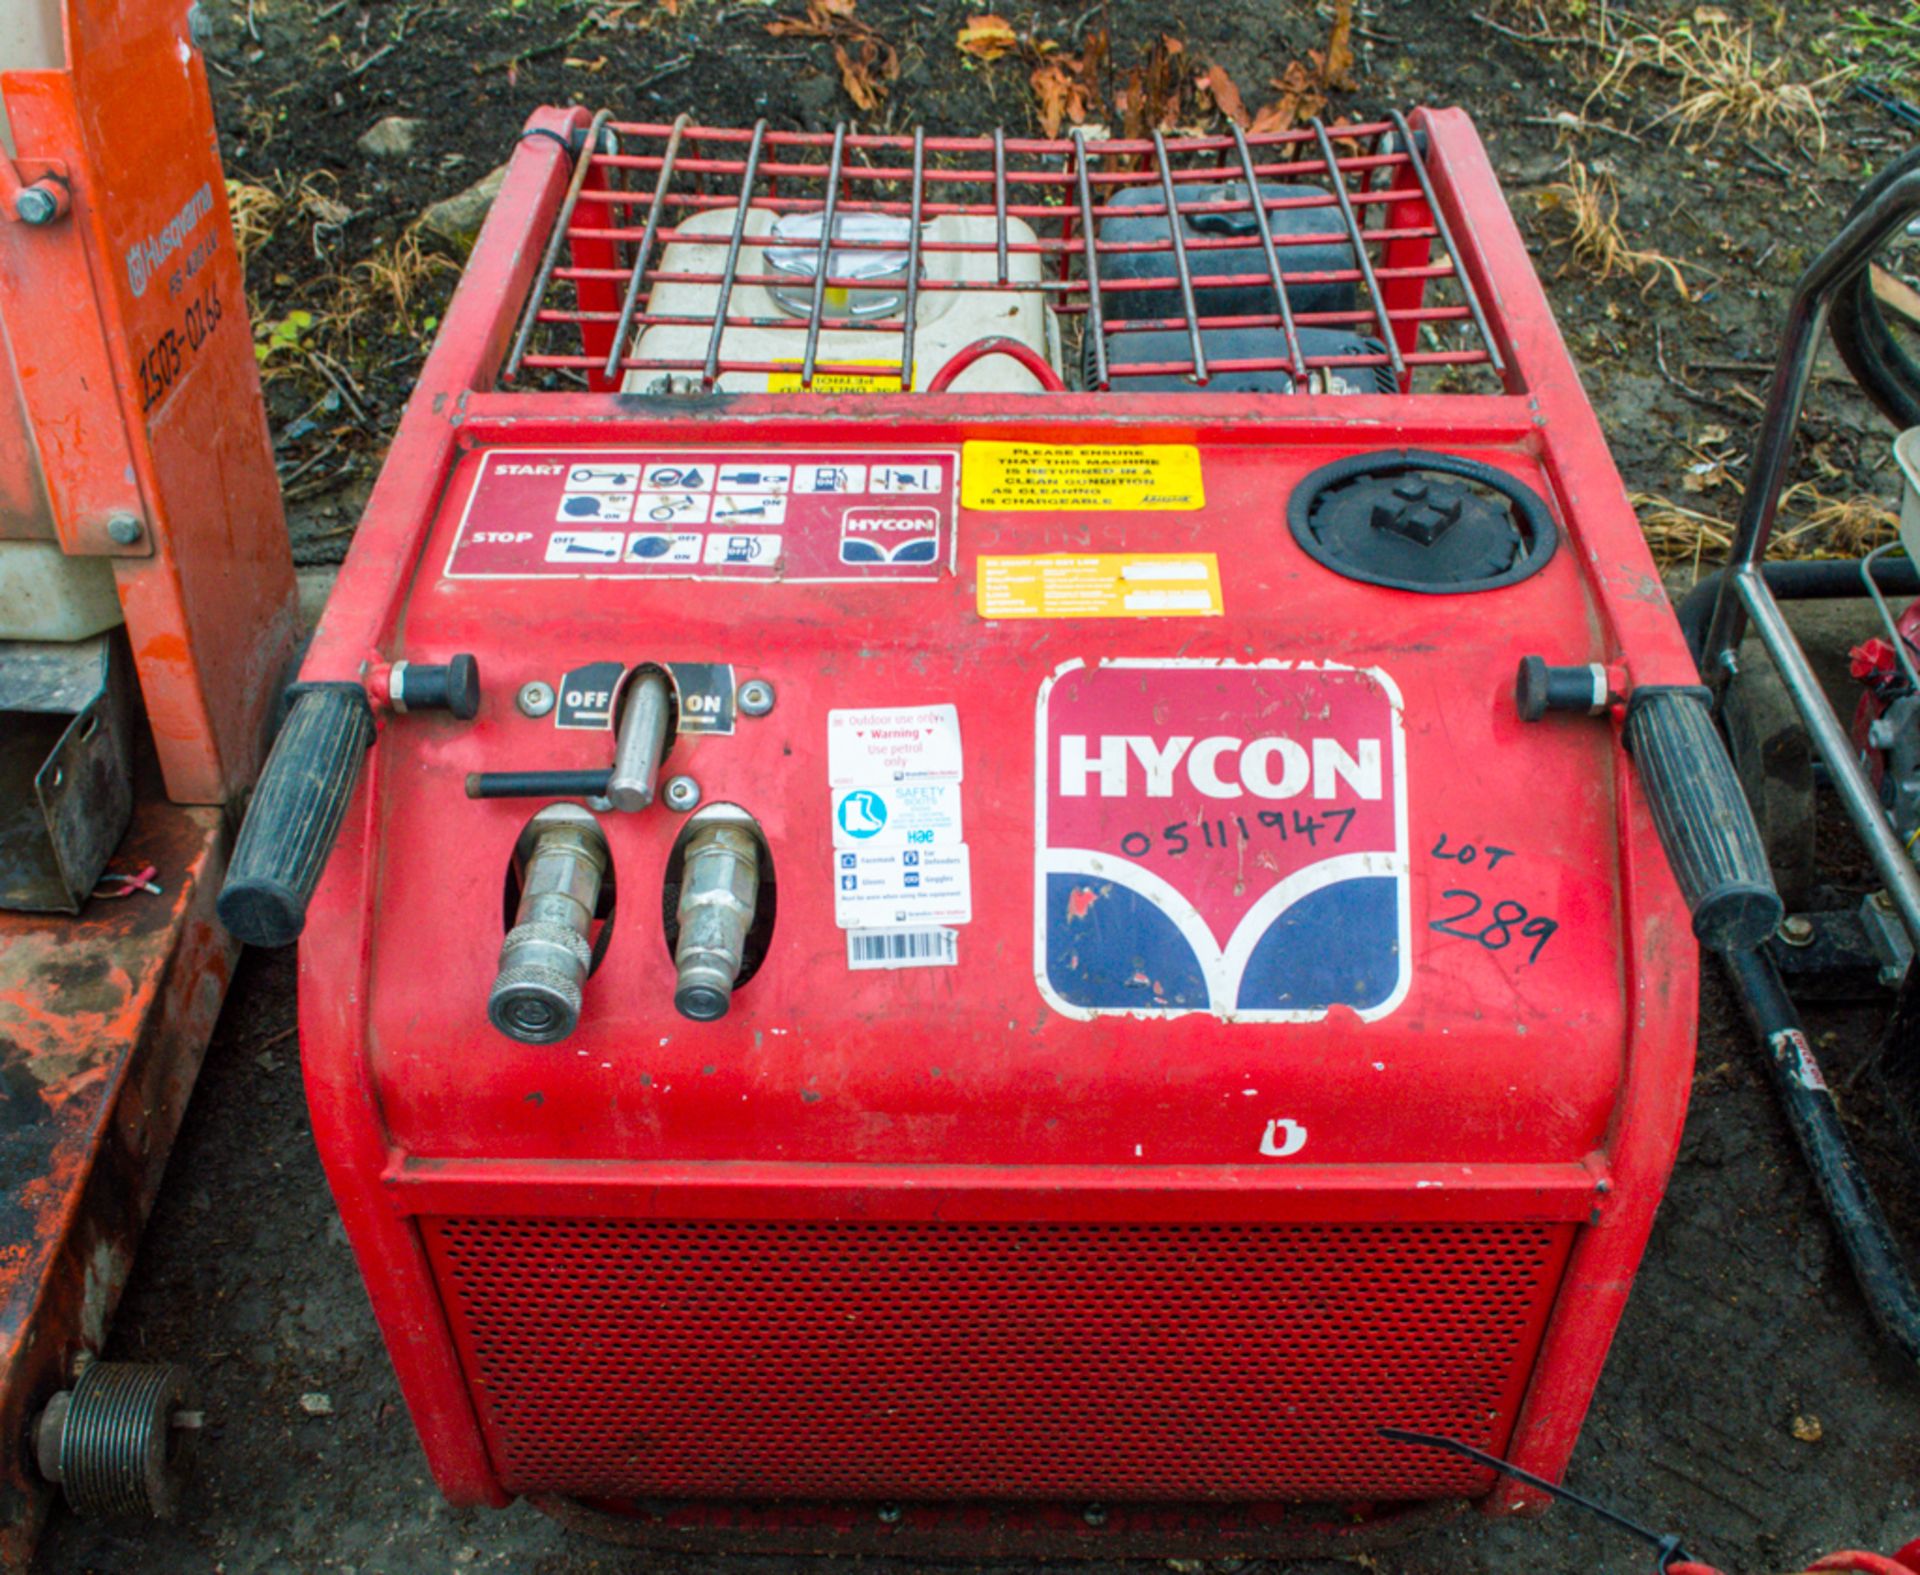 Hycon HPP09 petrol driven hydraulic power pack 0511-1947